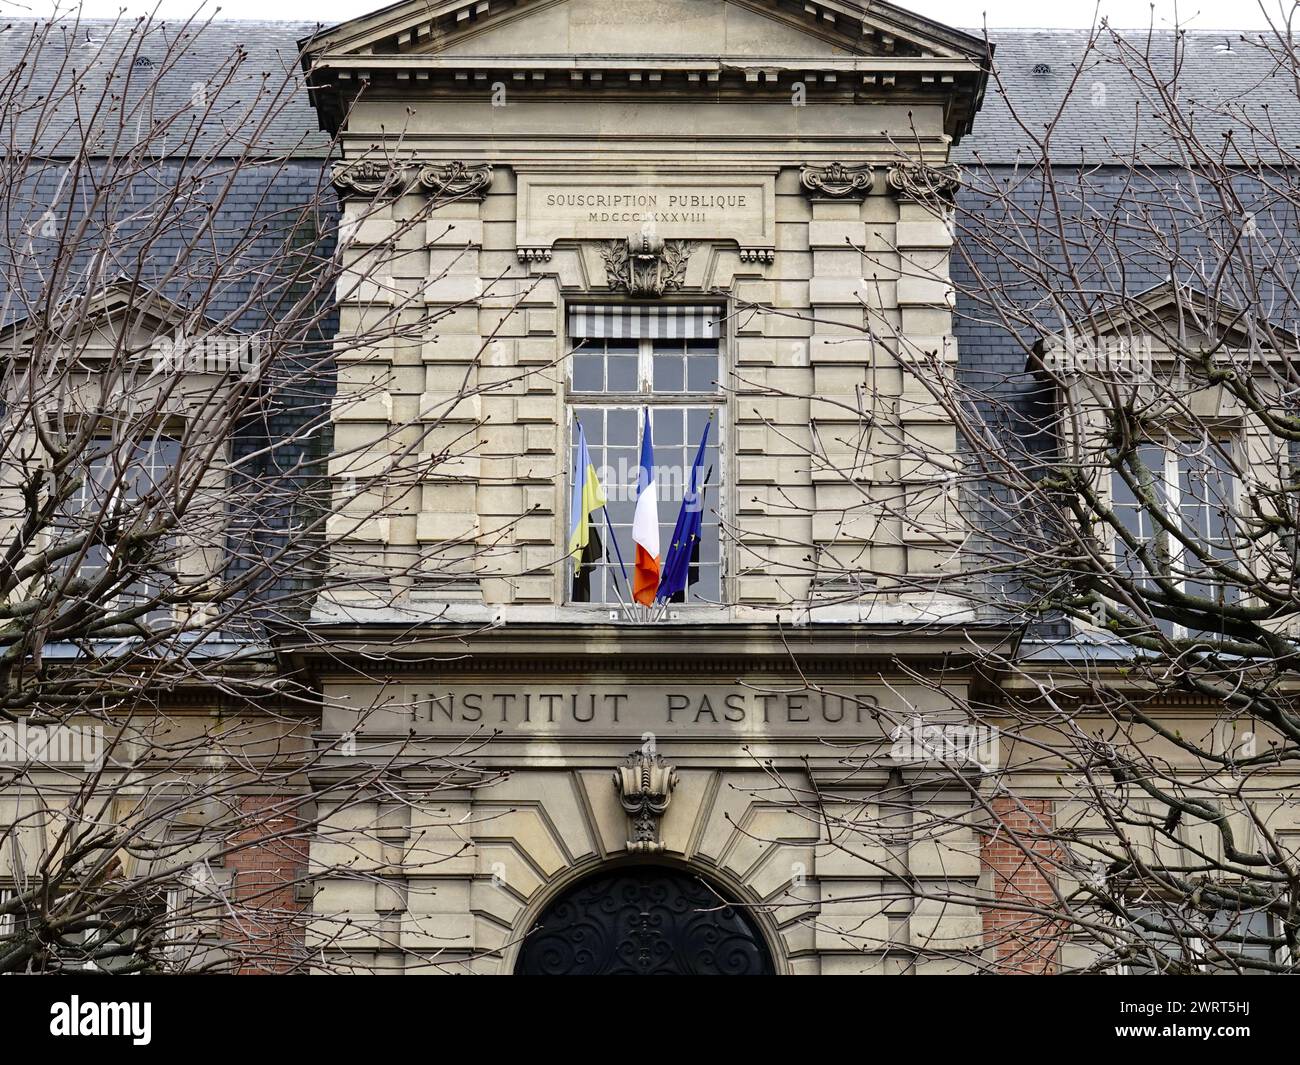 Pasteur Institute, Institut Pasteur, non-profit private foundation dedicated to the study of biology, micro-organisms, diseases, and vaccines, Paris. Stock Photo